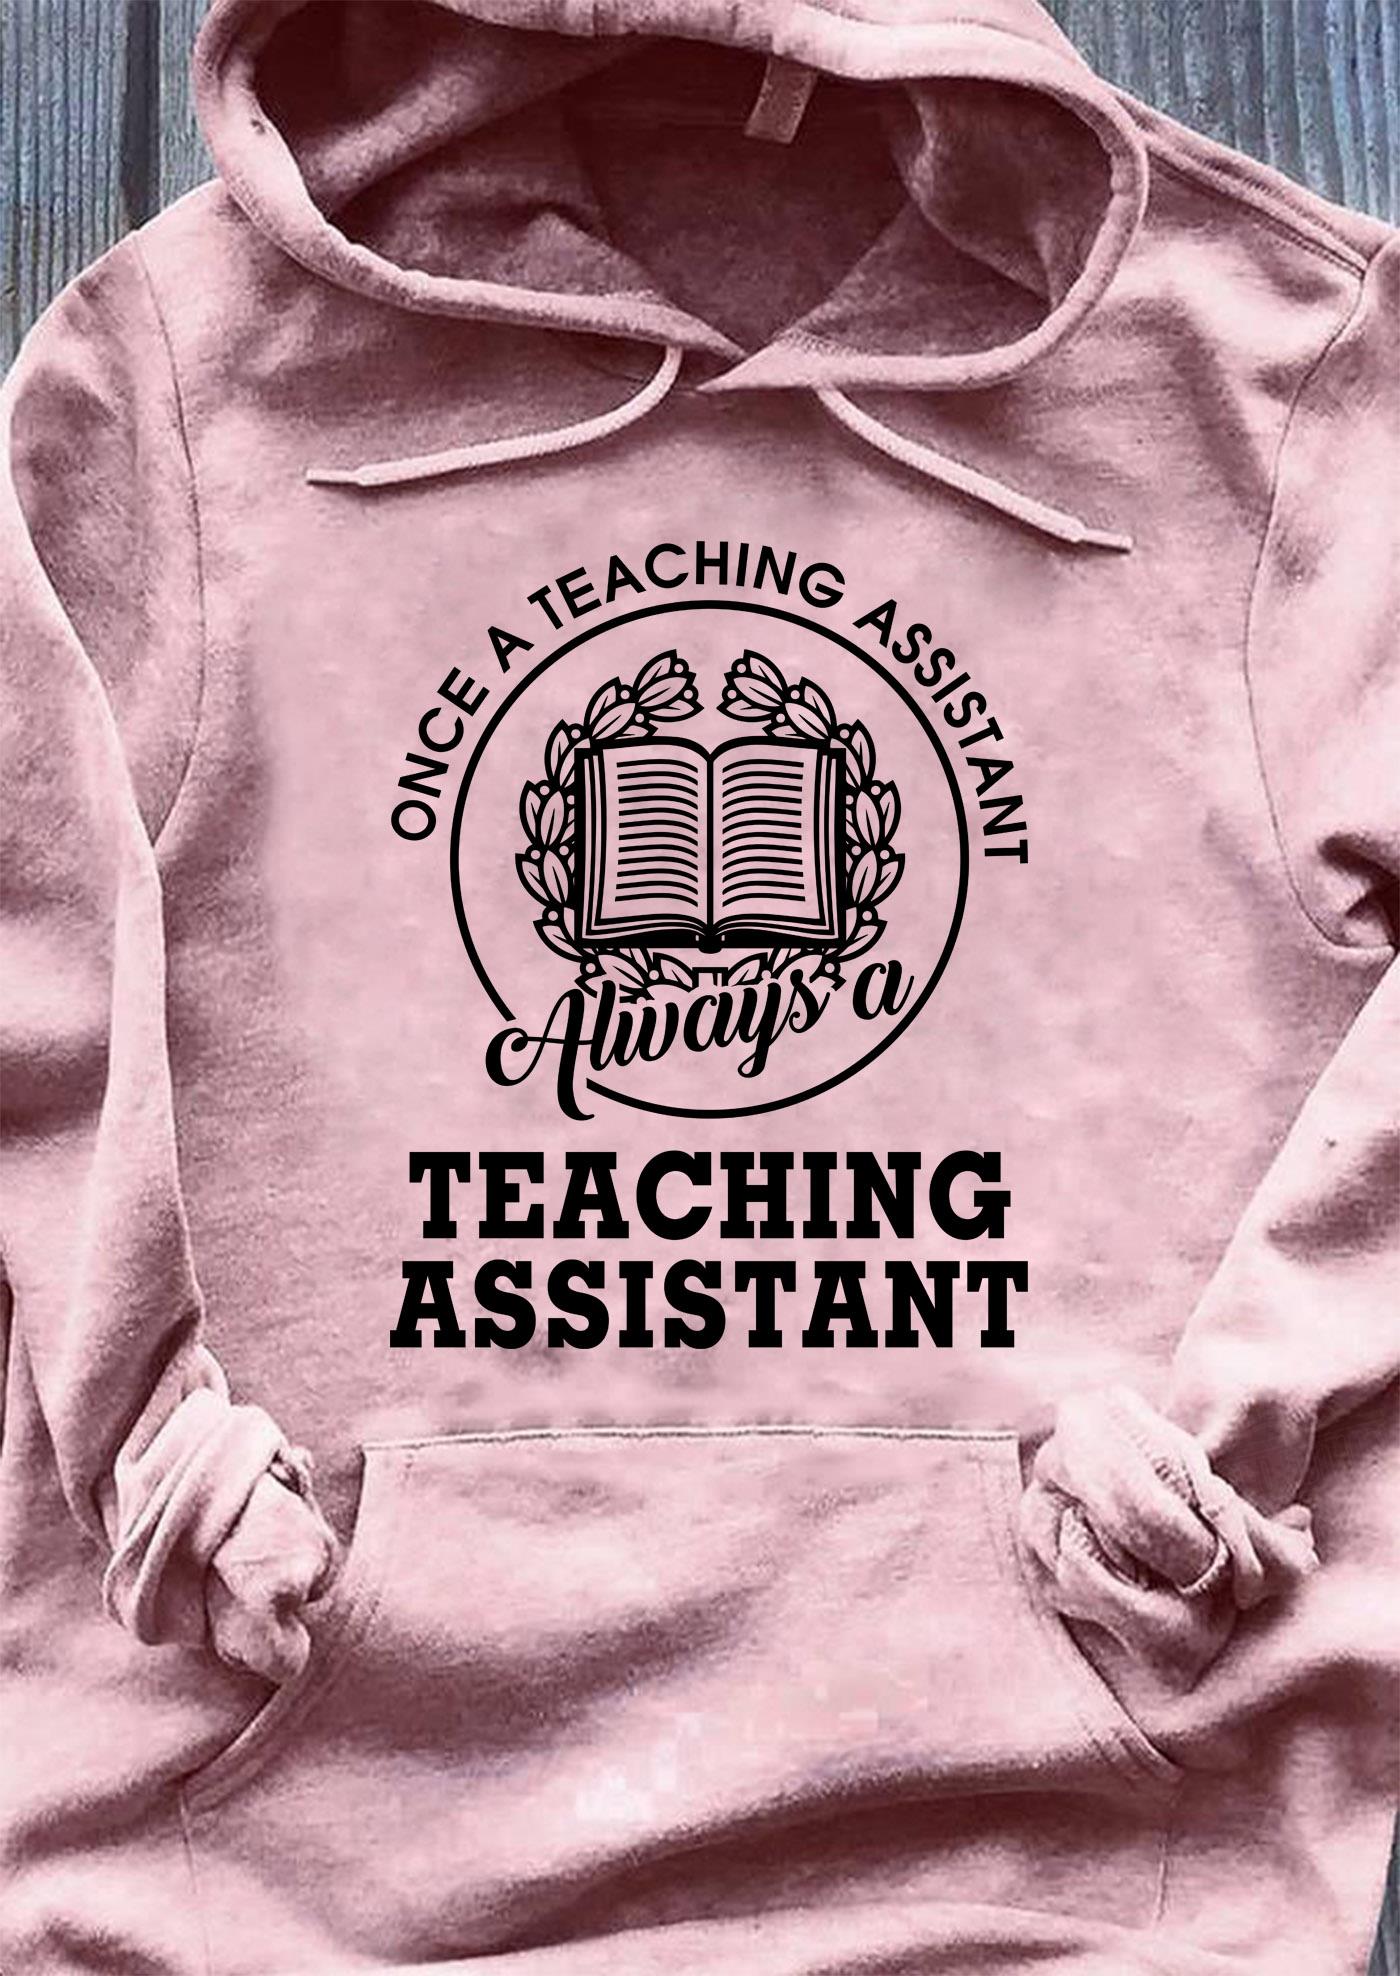 Once A Teaching Assistant Teaching Assistant Shirt